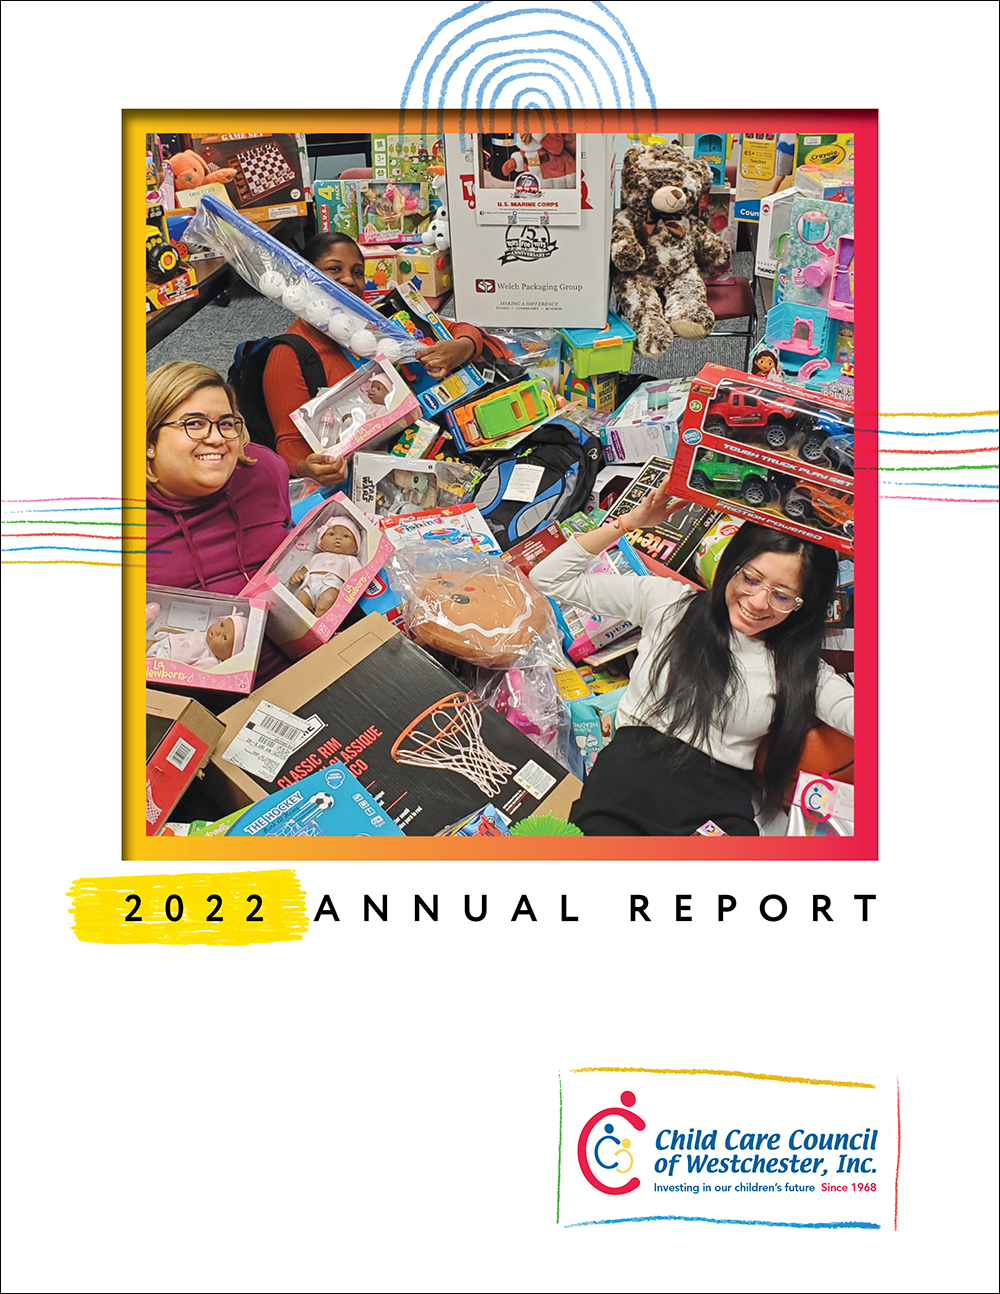 Child Care Council of Westchester Annual Report